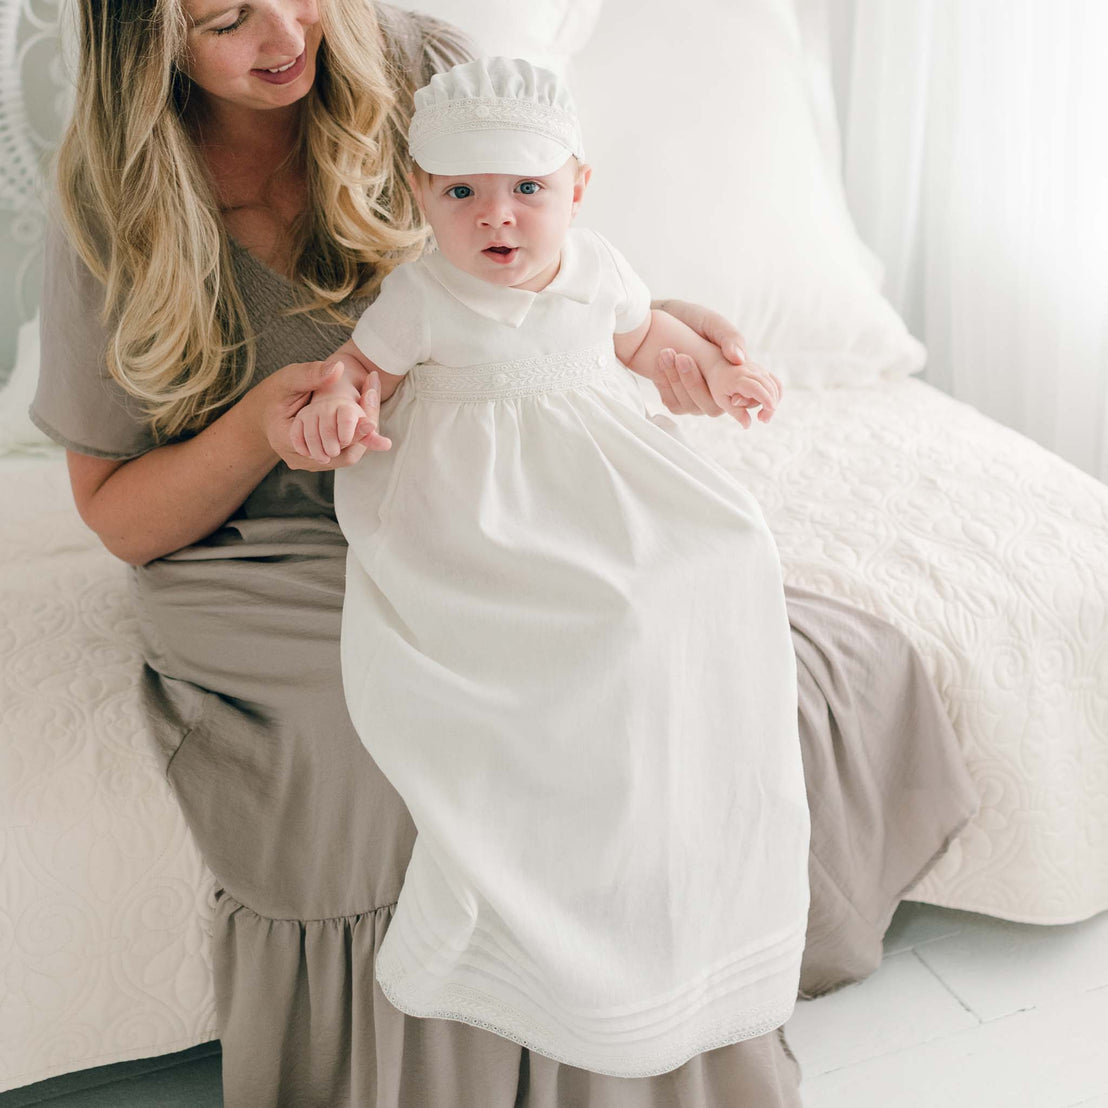 A woman sits on the edge of a white bed, holding a baby's hands. The baby is wearing an Oliver Convertible Gown | Romper & Skirt Set. The woman, in a light gray dress, smiles as she looks at the baby. The room is bright with soft lighting.